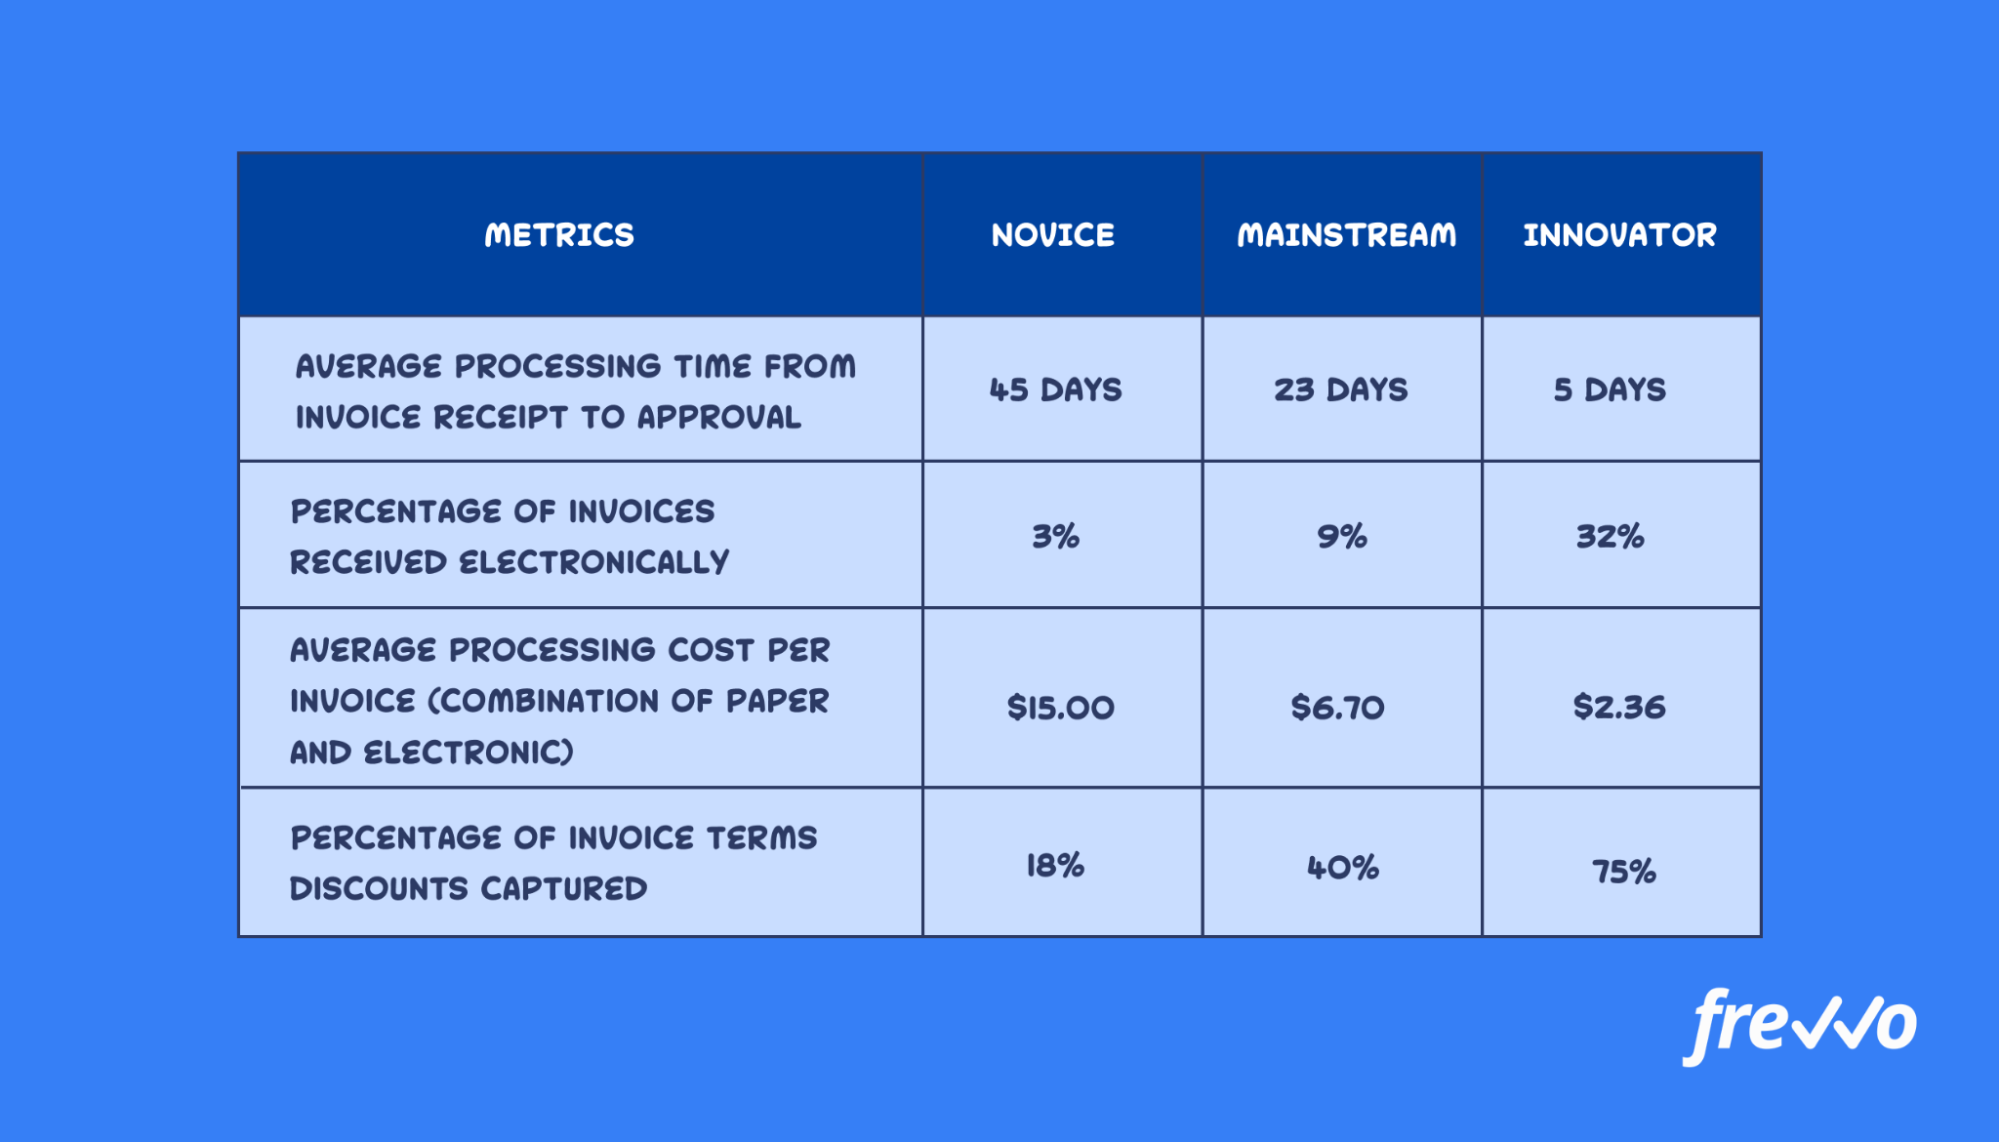 Average processing times for invoices